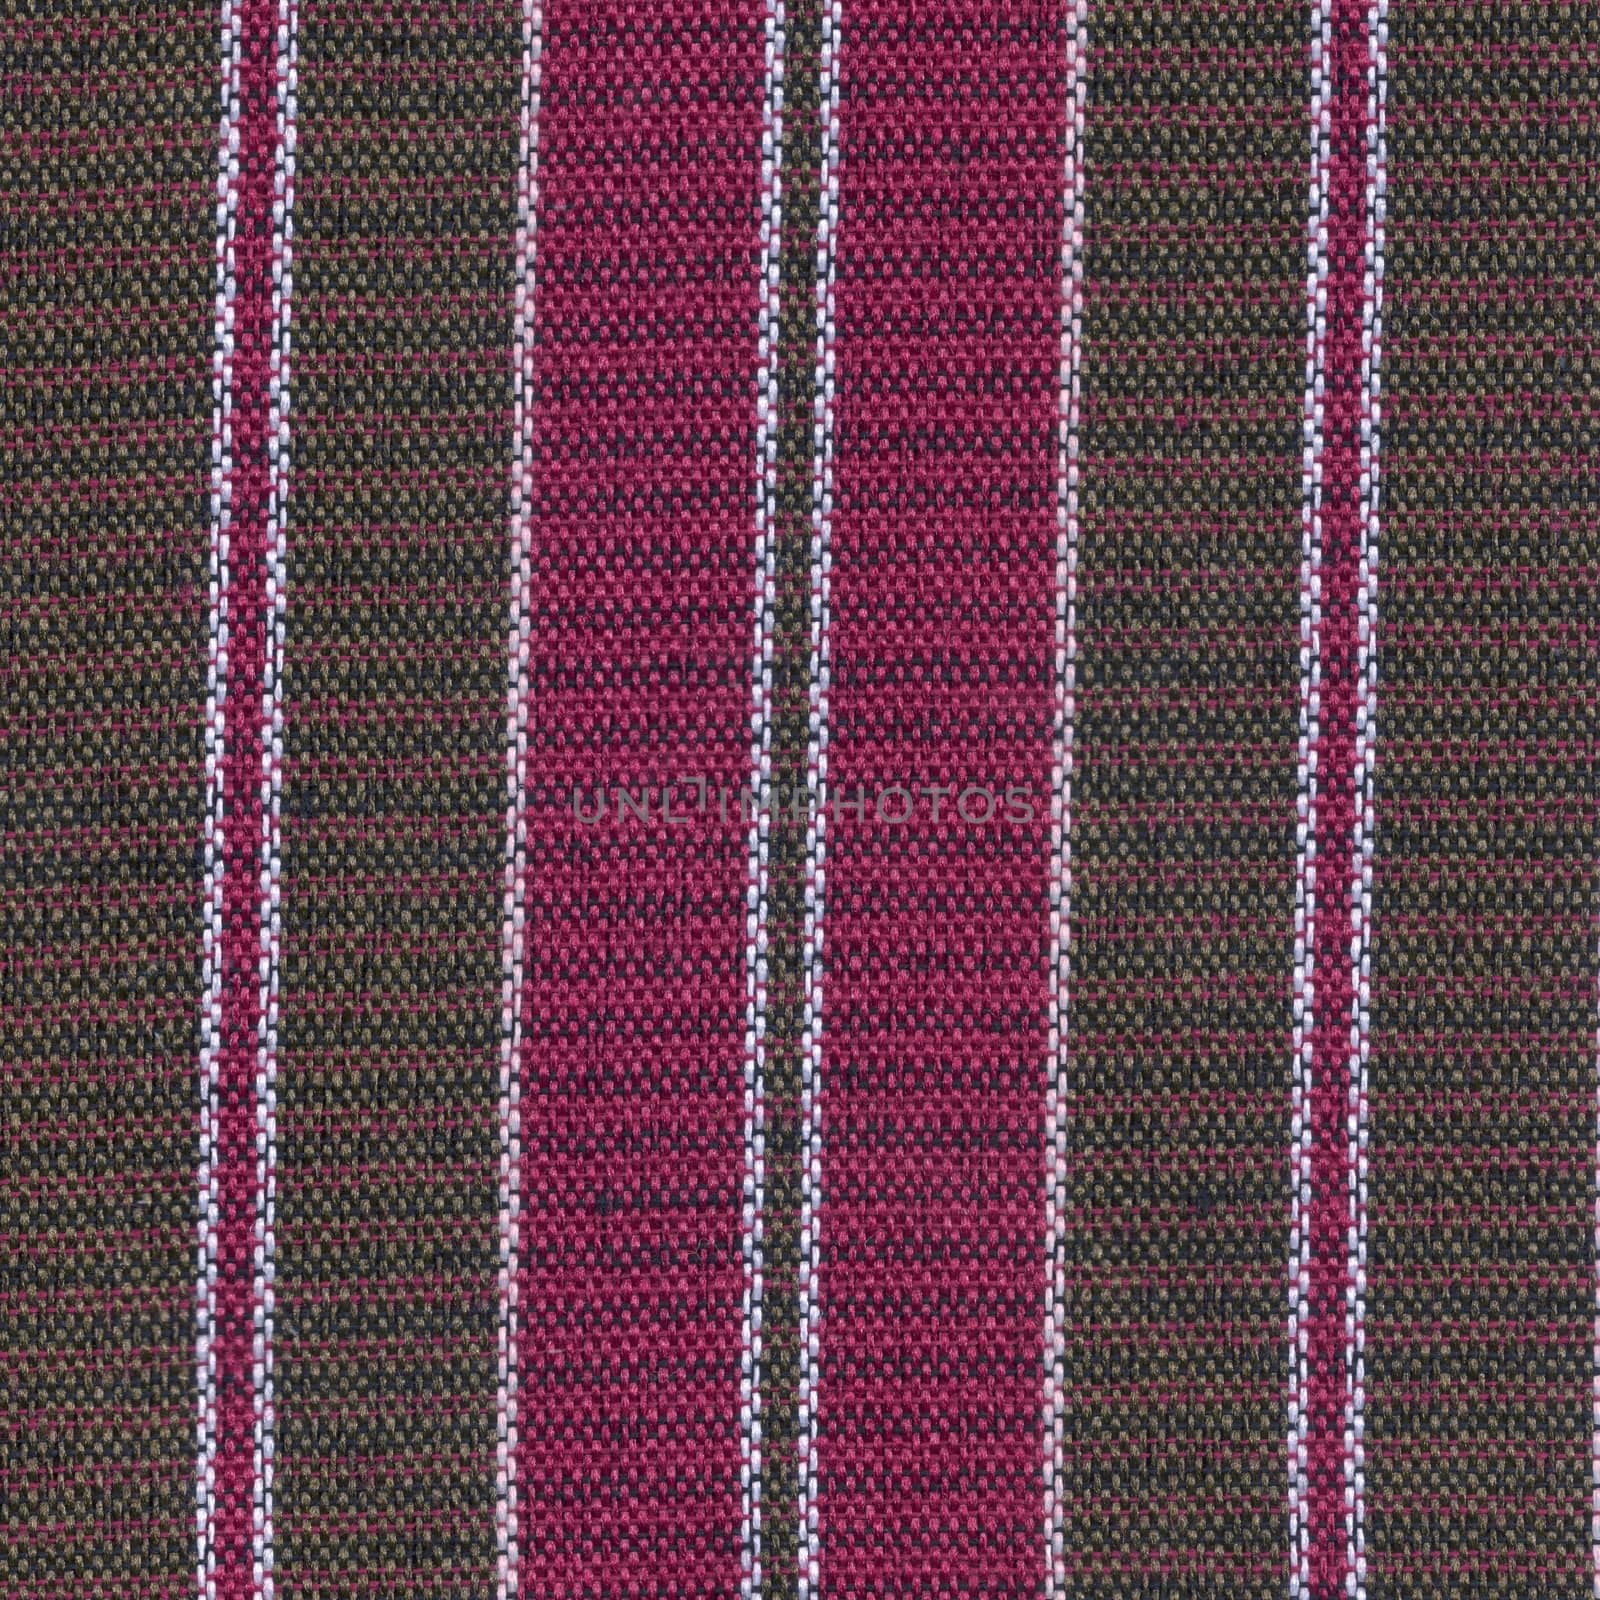 Background pattern that extends the detail pattern of the fabric.